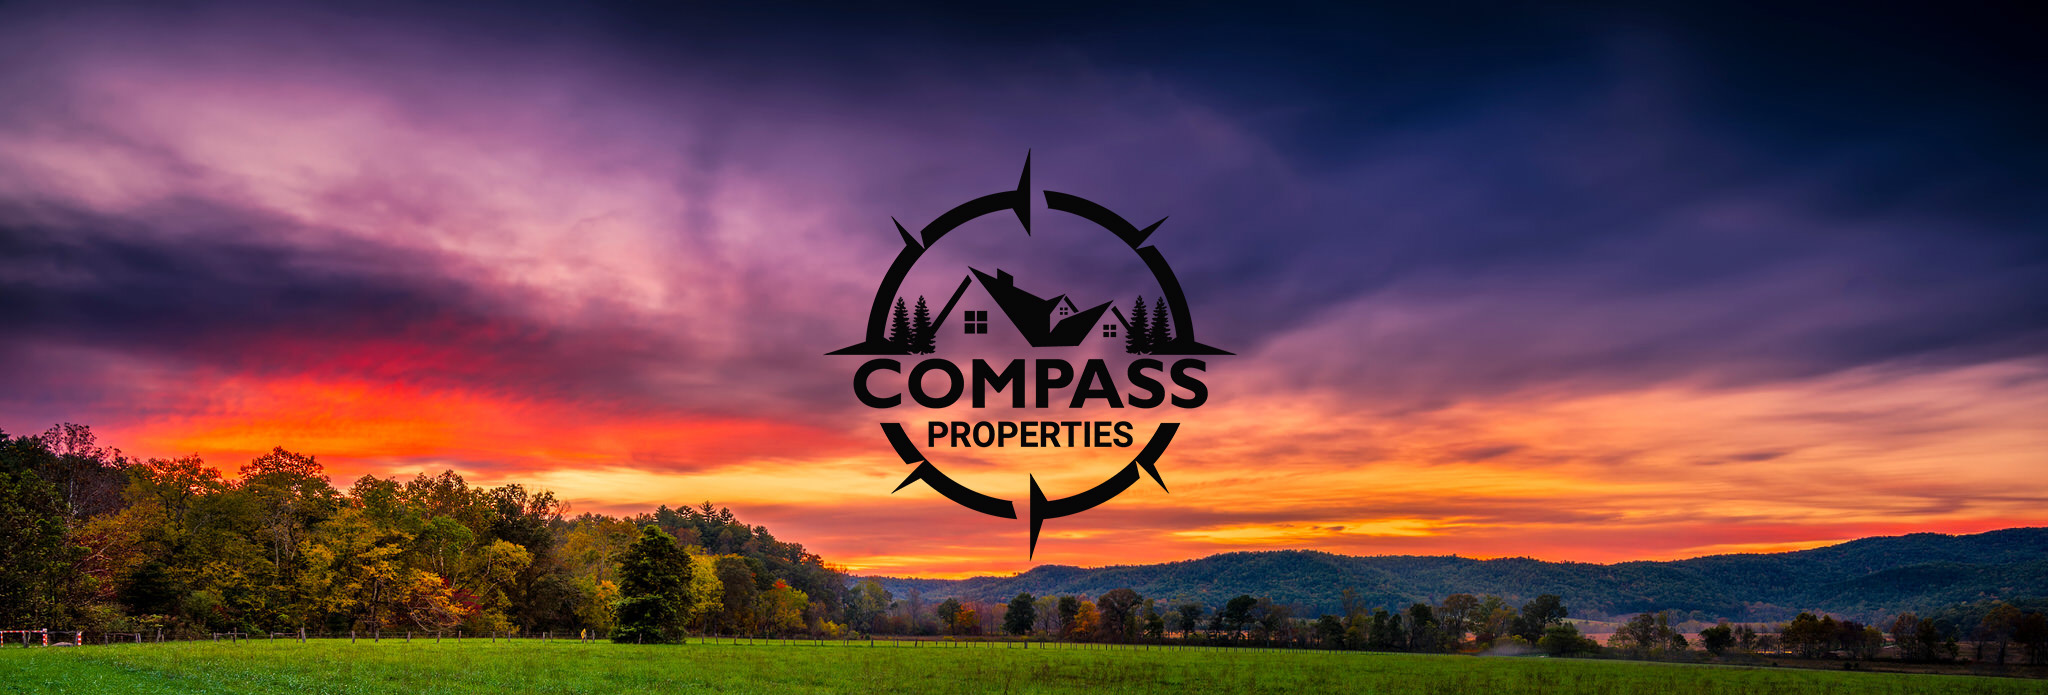 Compass Vacation Properties email header